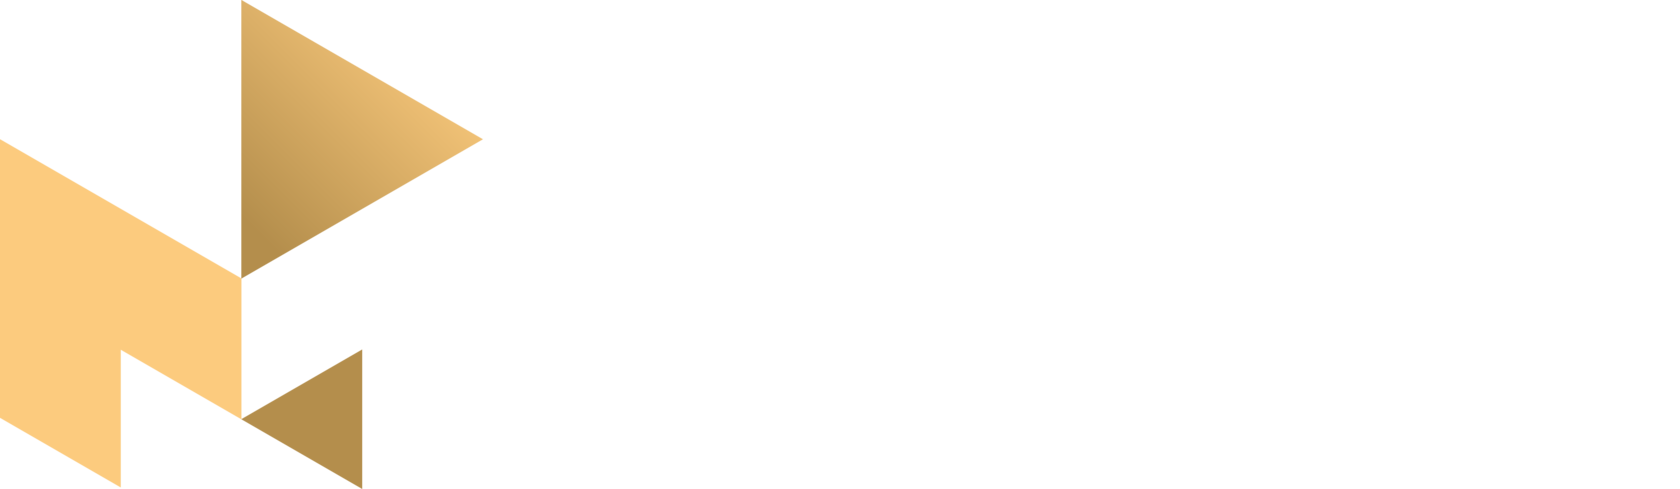 Makers Reality